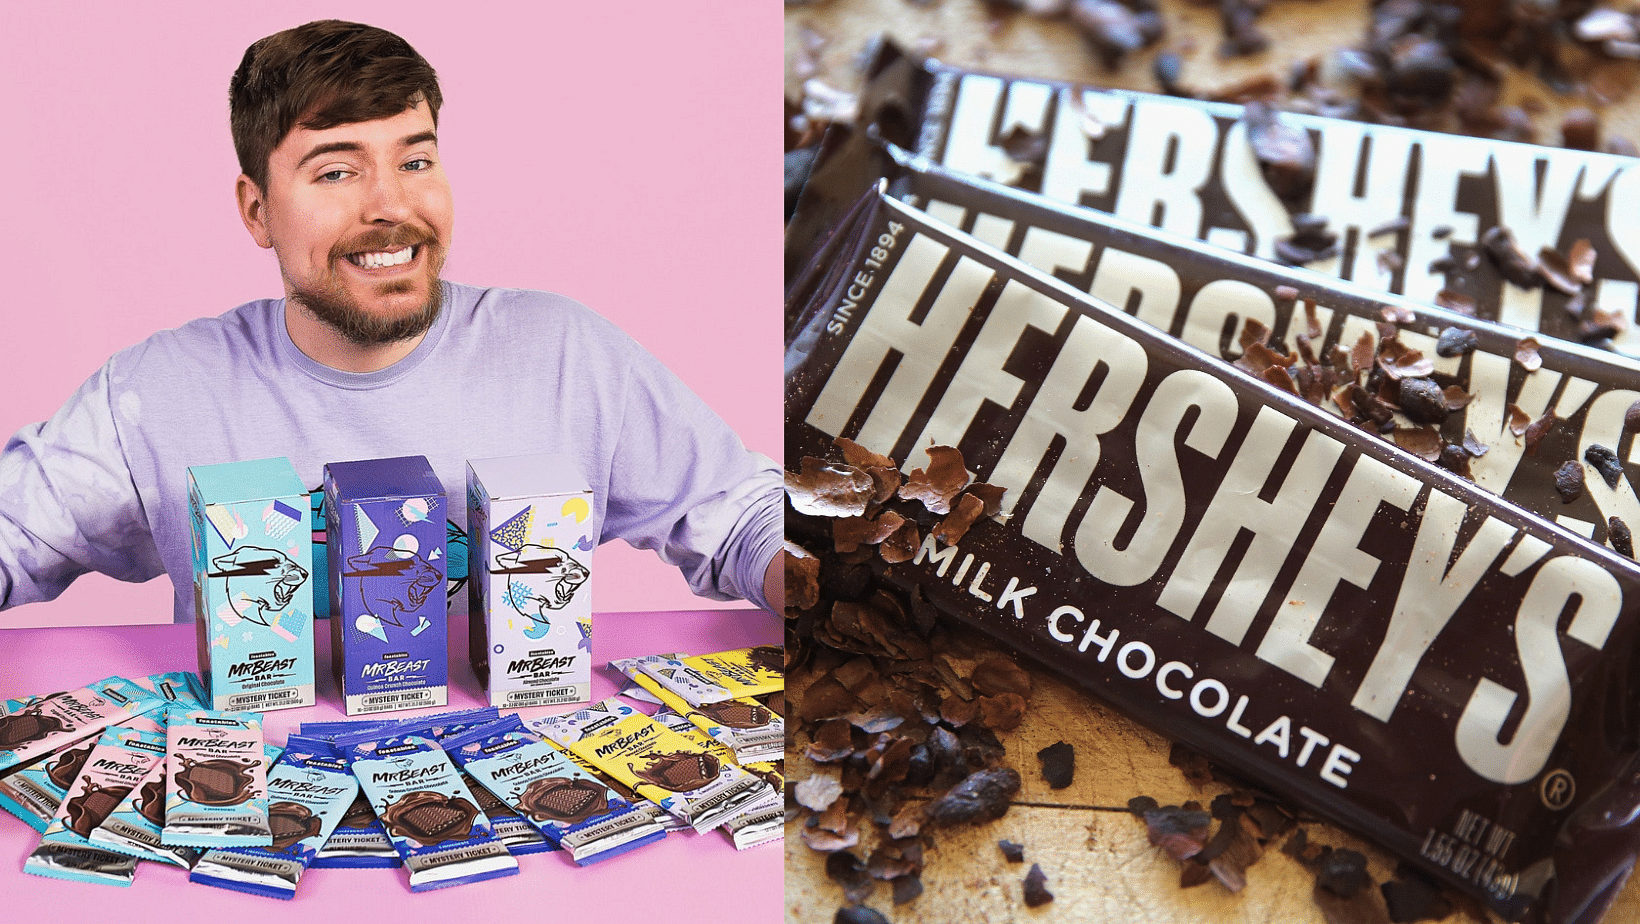 Bar Review: Mr. Beast Feastables — Order From Chocolate Tales